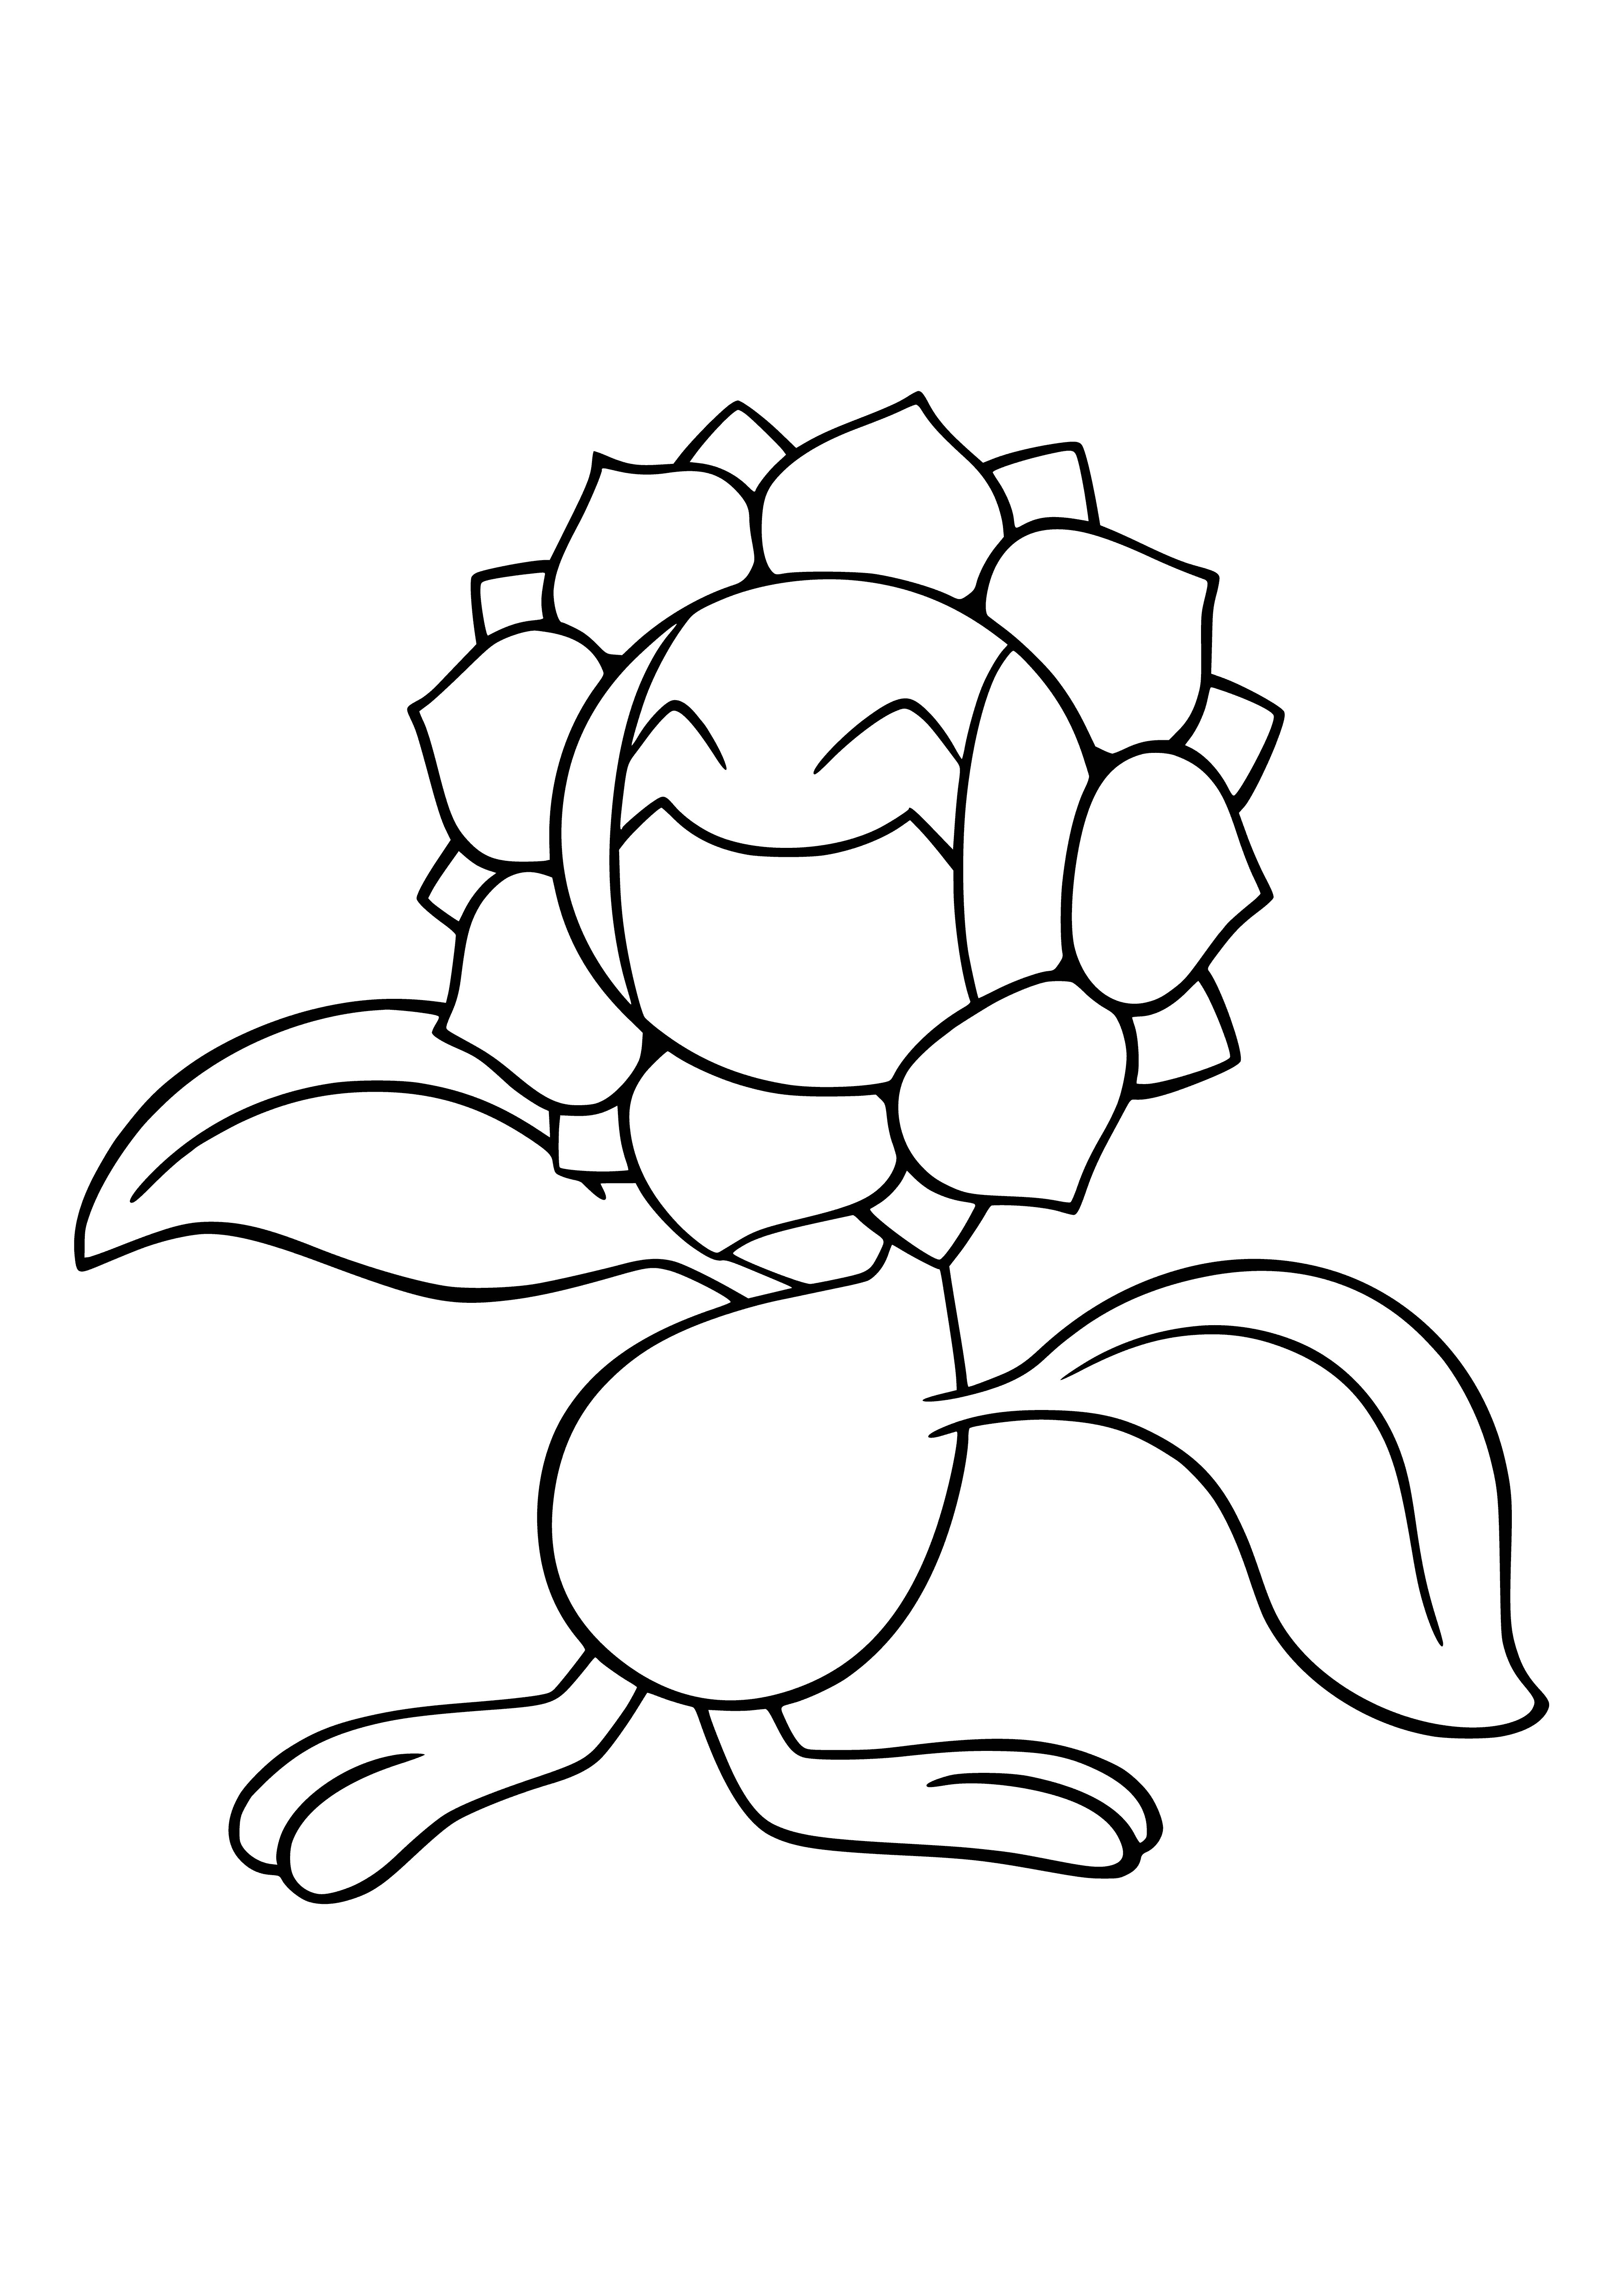 coloring page: Yellow bipedal Pokemon w/ small head, black-striped face/arms/body/tail, two leaves on back, black-striped 3-toed feet. Black eyes, mouth, & dots on each arm.